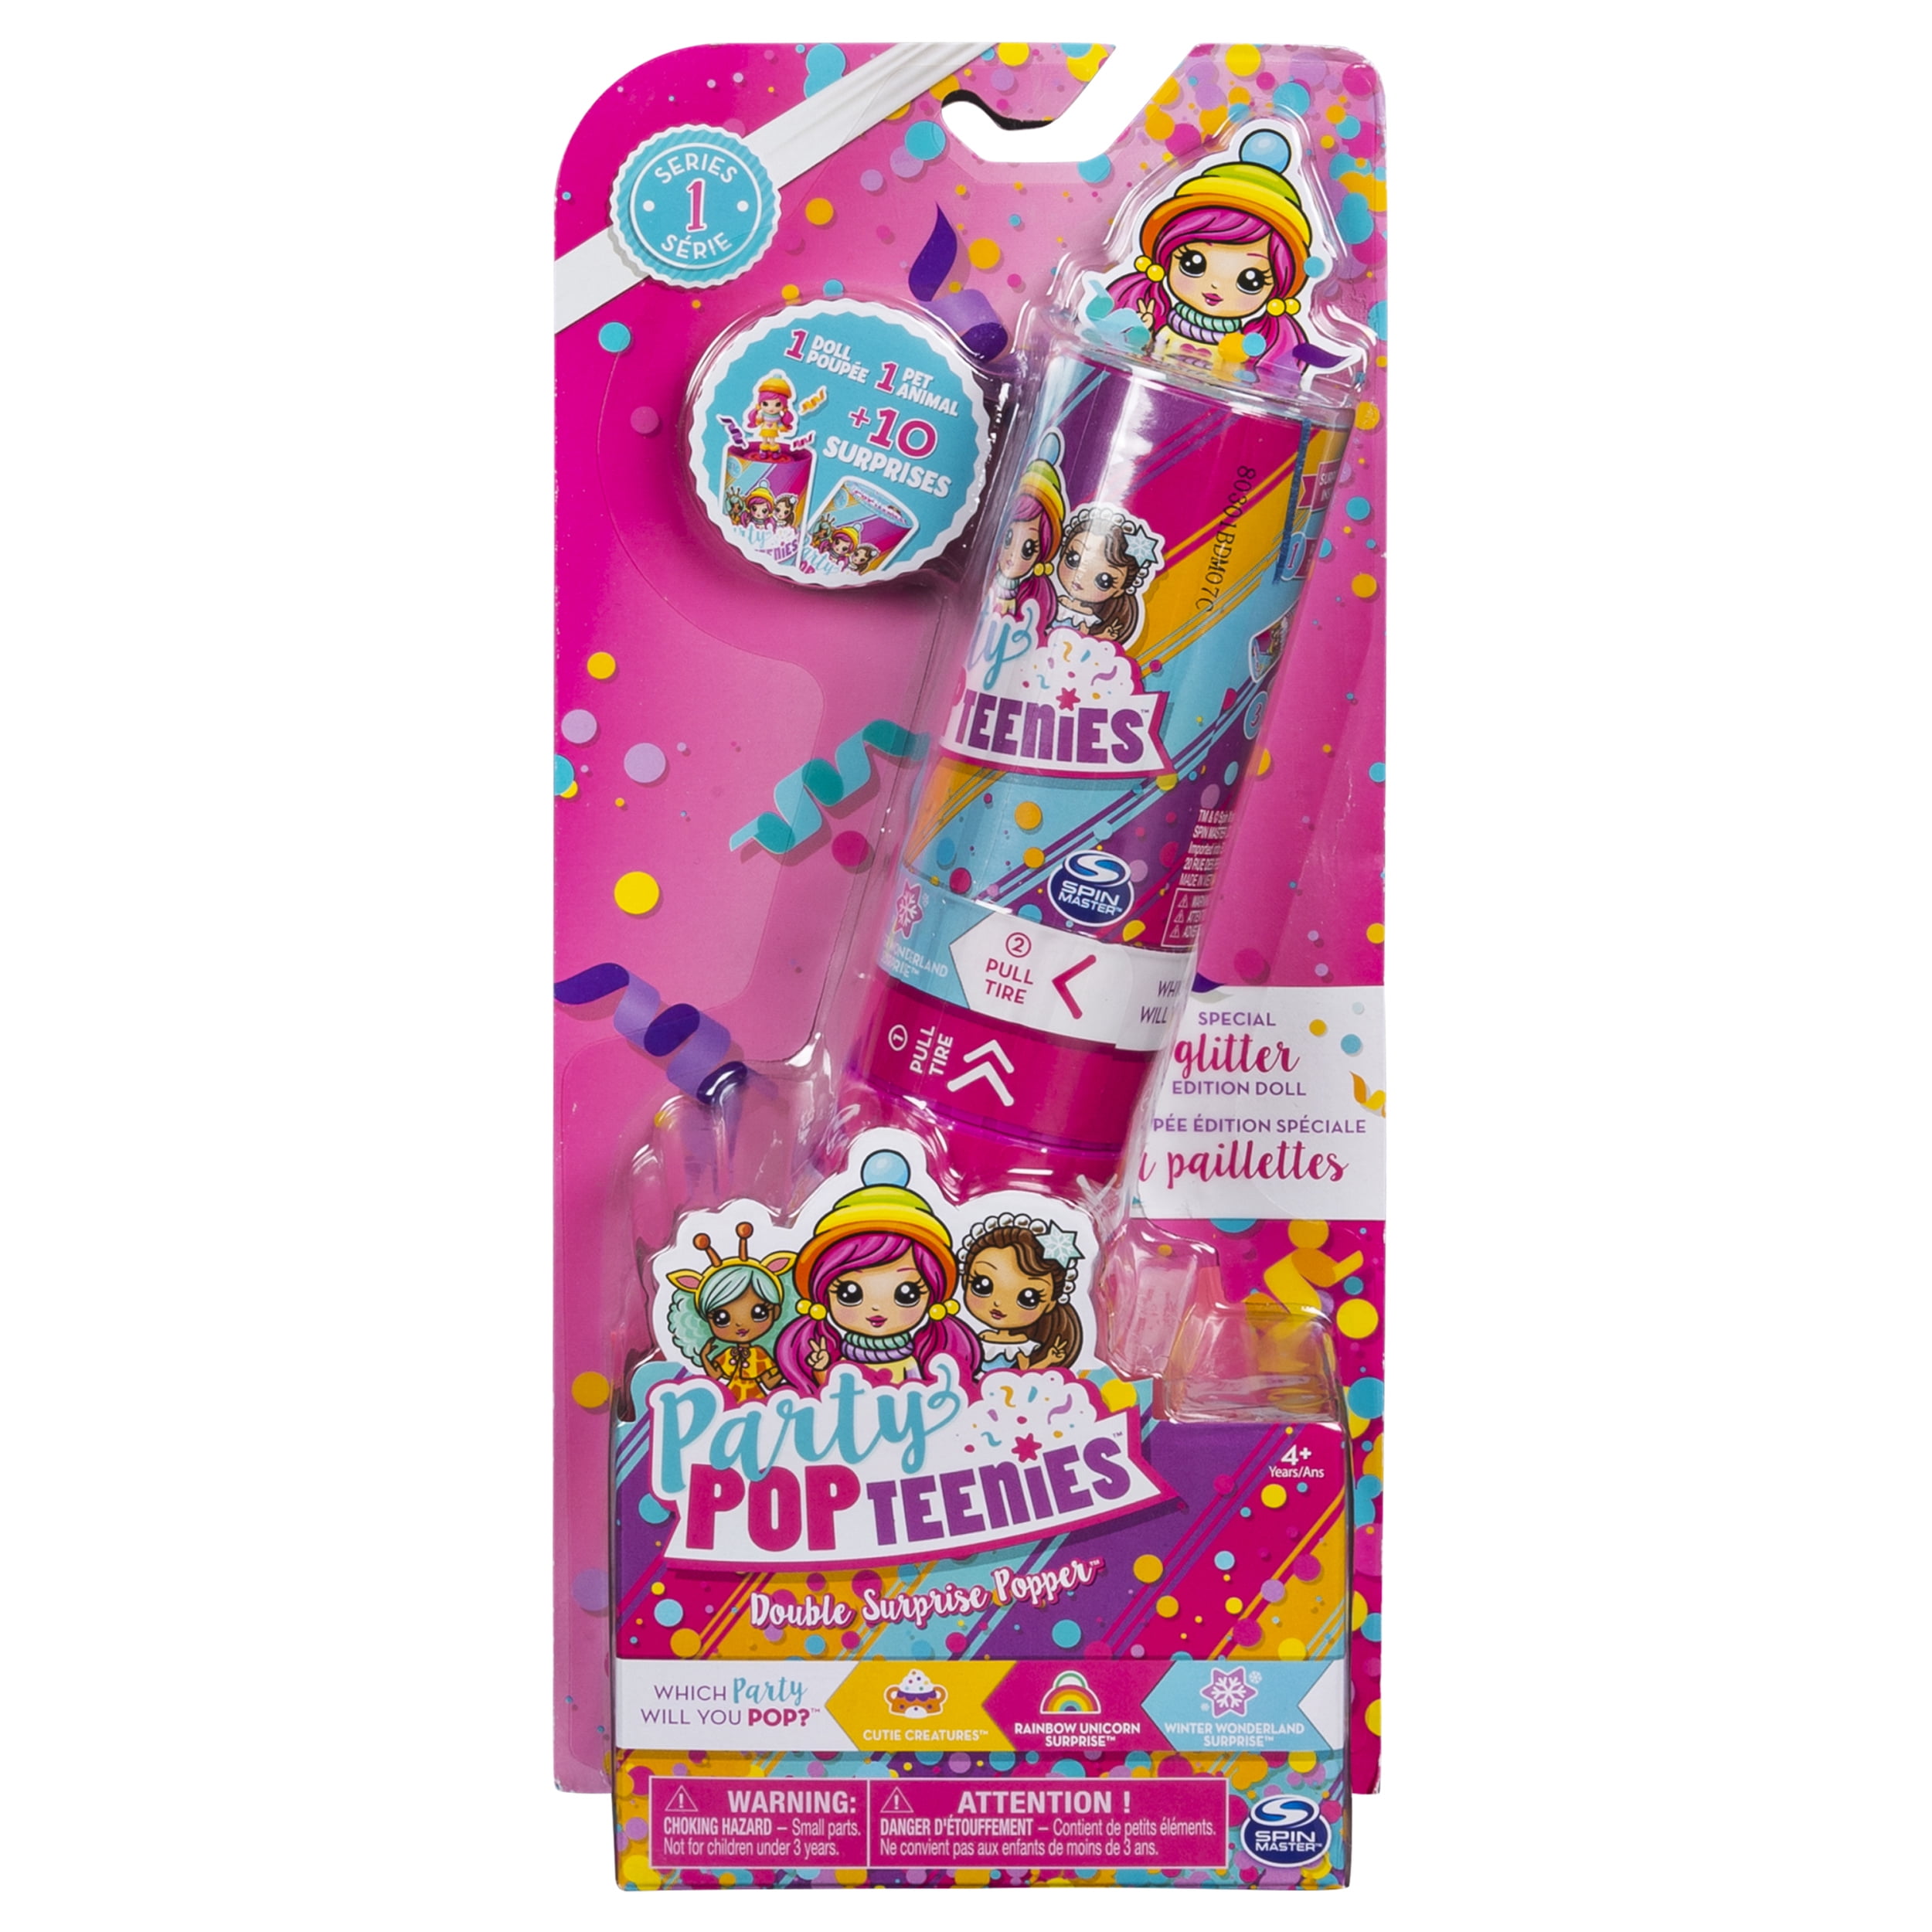 6 Piece Lot Series 1 Surprise Poppers Party POPTEENIES Brand New 